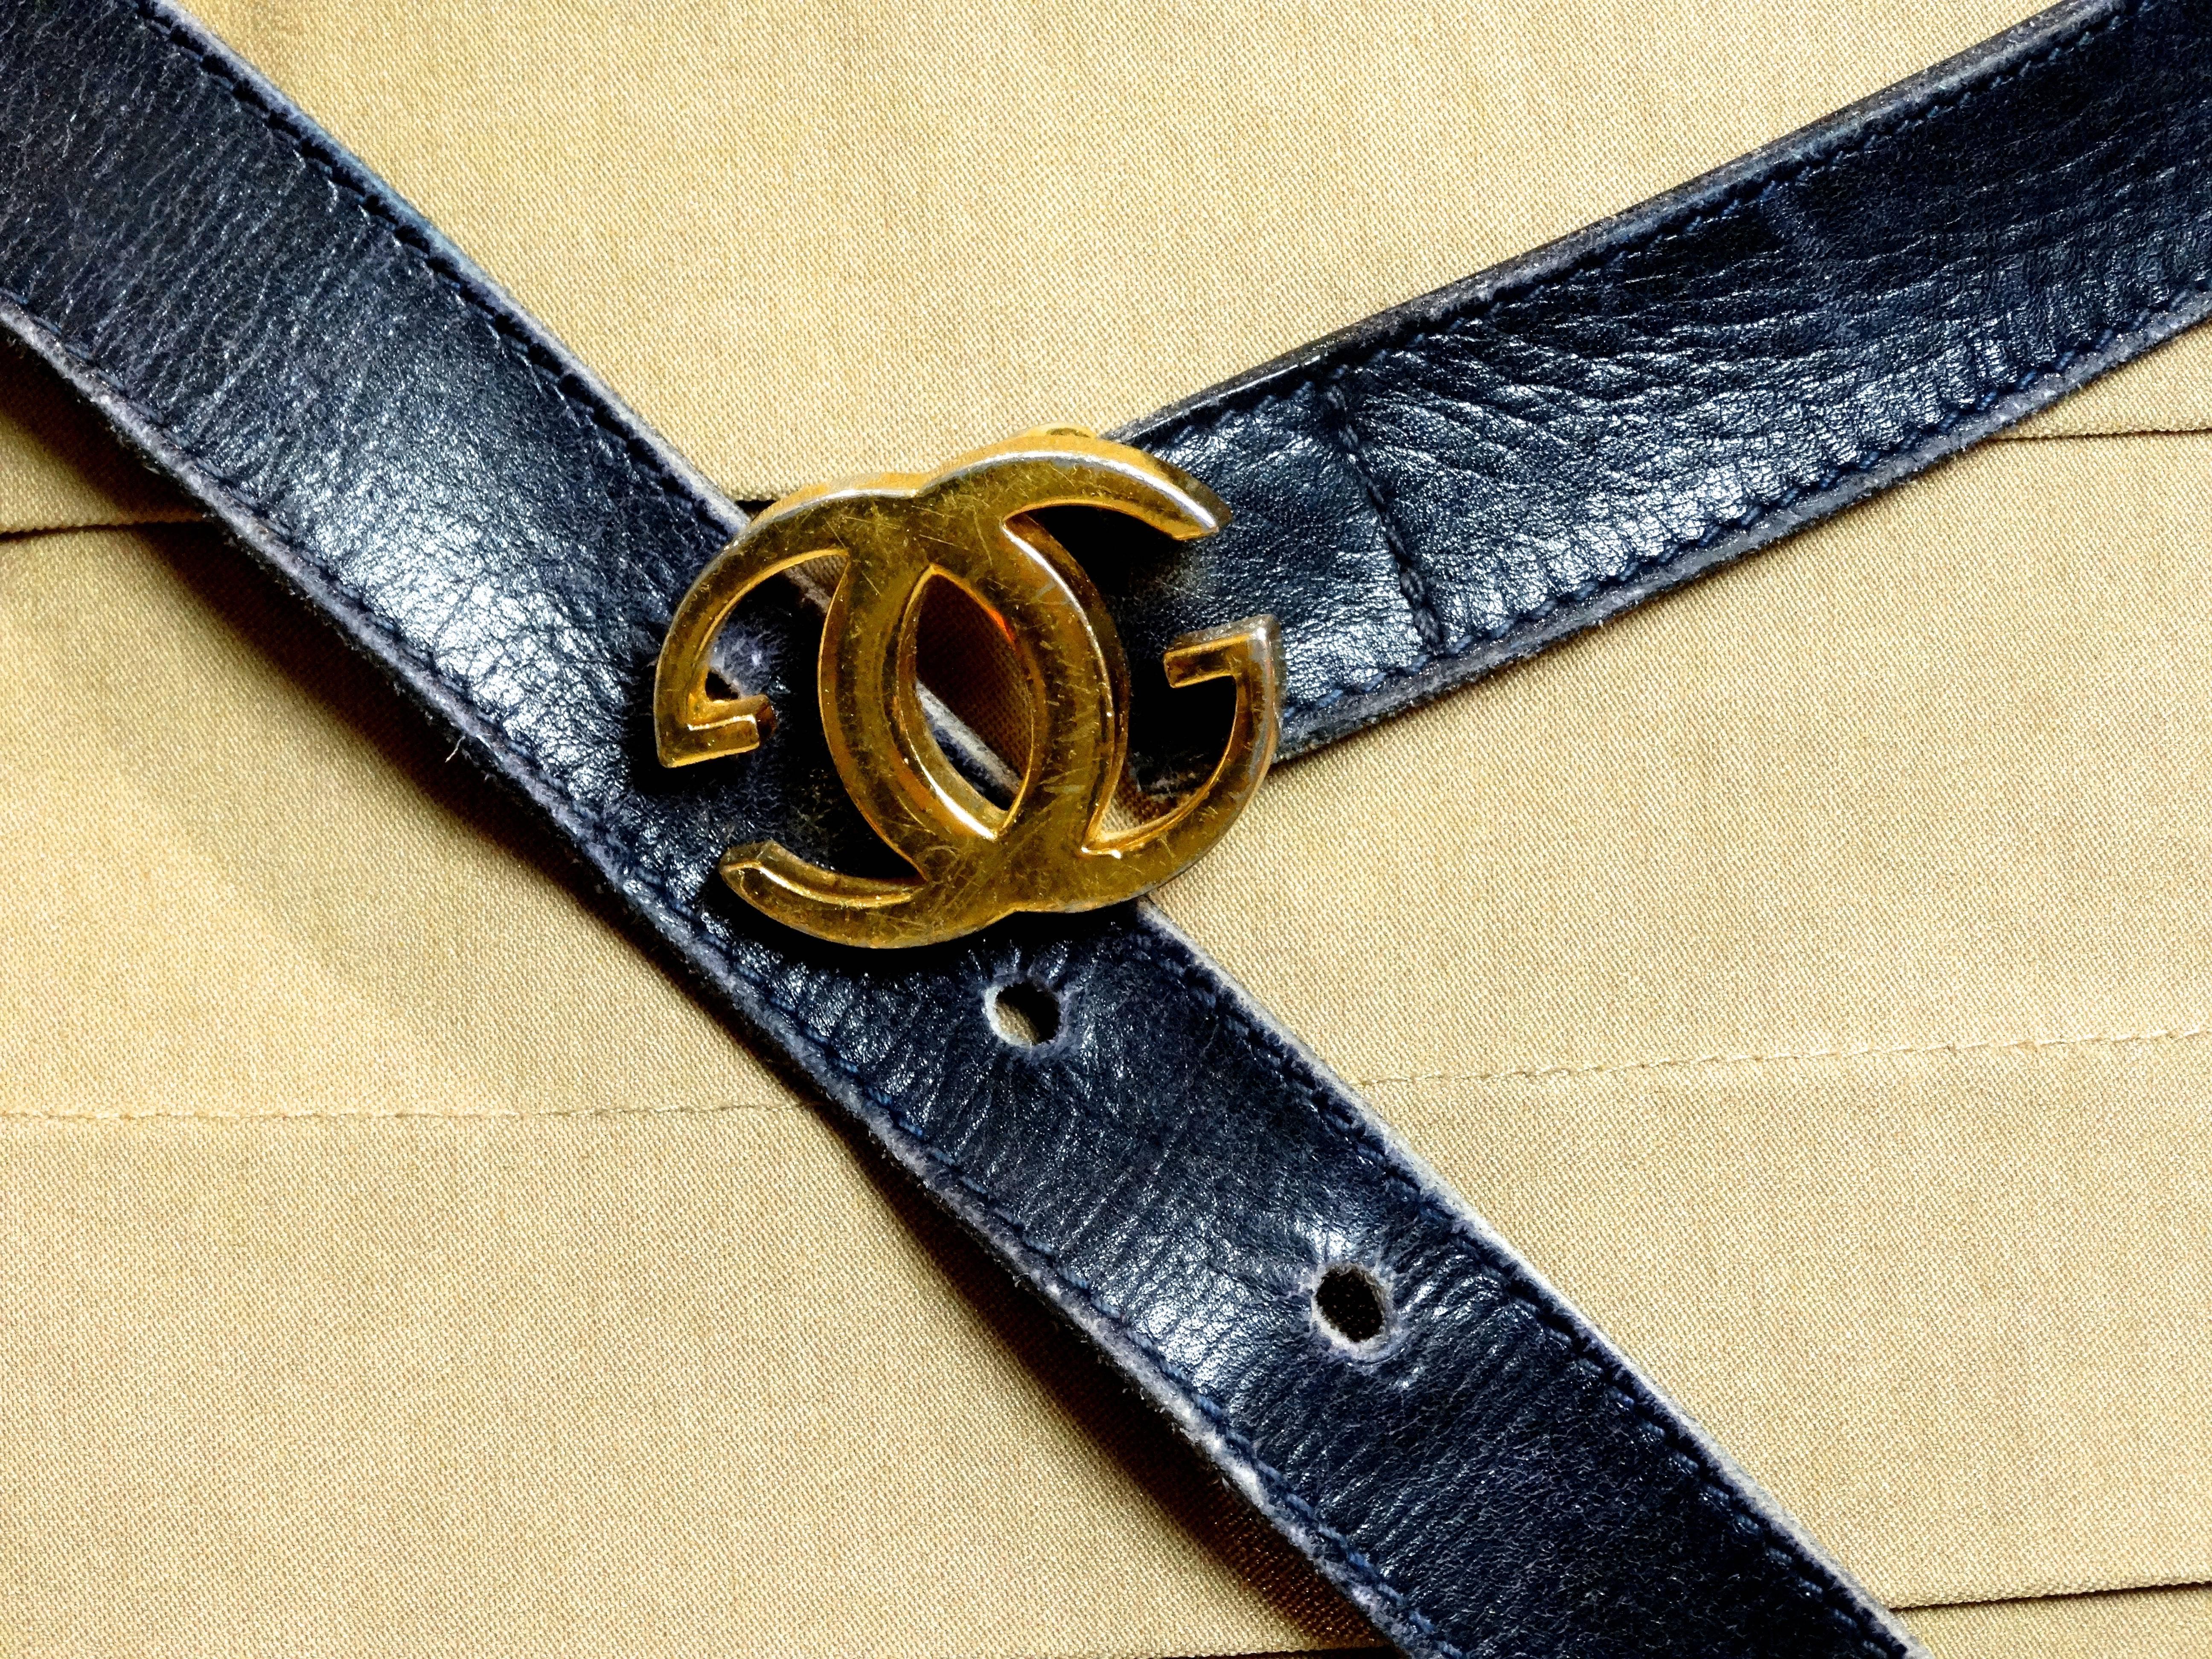 Classic Gucci navy blue leather belt from the 1970's featuring it's iconic 